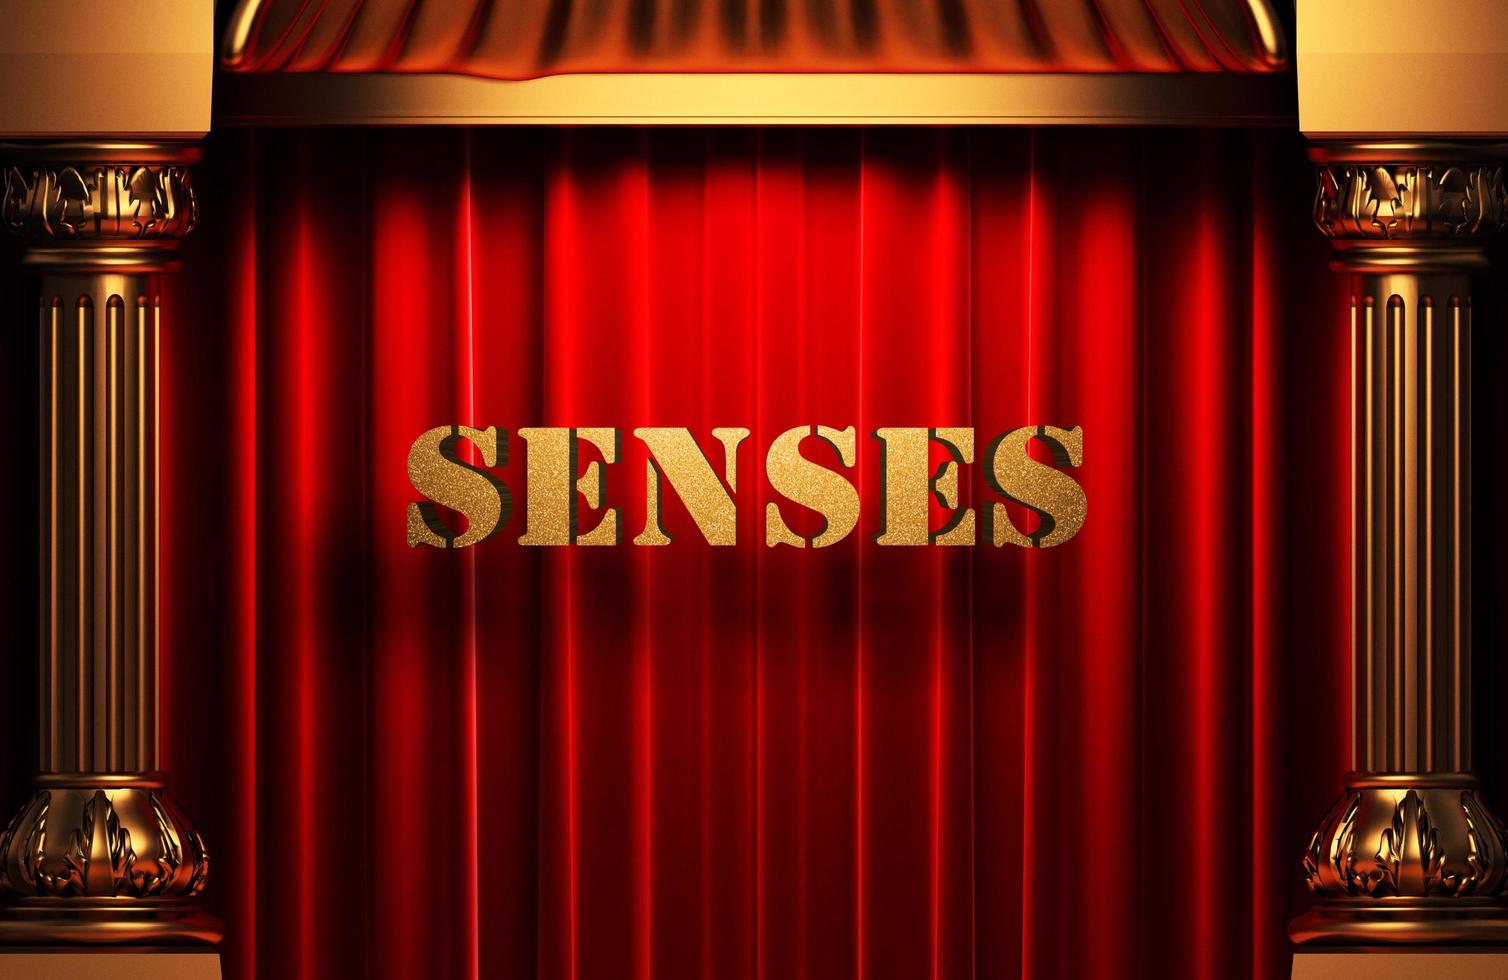 senses golden word on red curtain photo